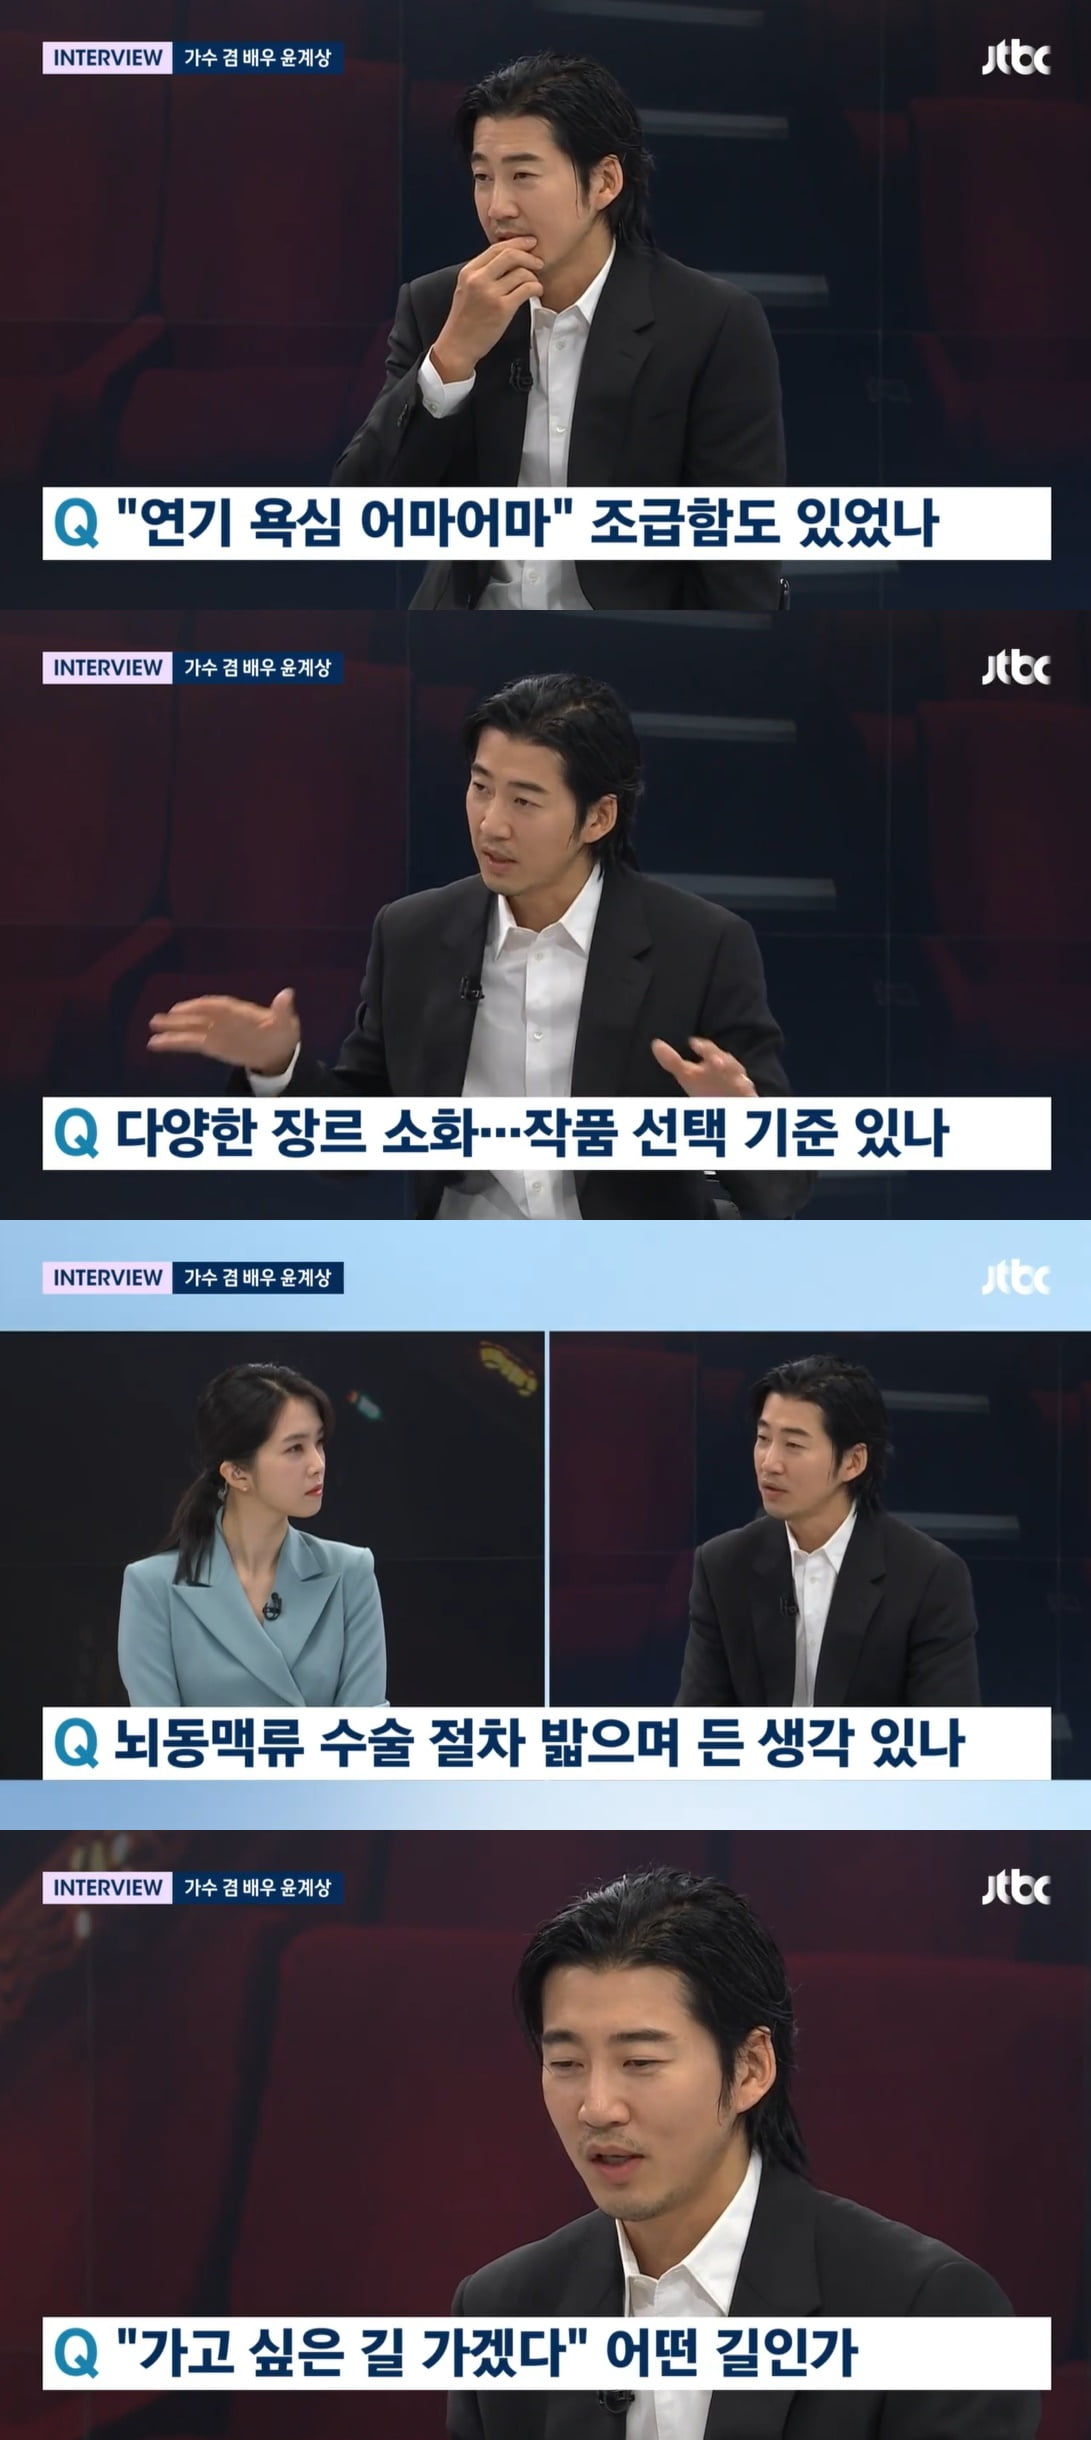 Yoon Kye-sang "I want to have both a son and a daughter"